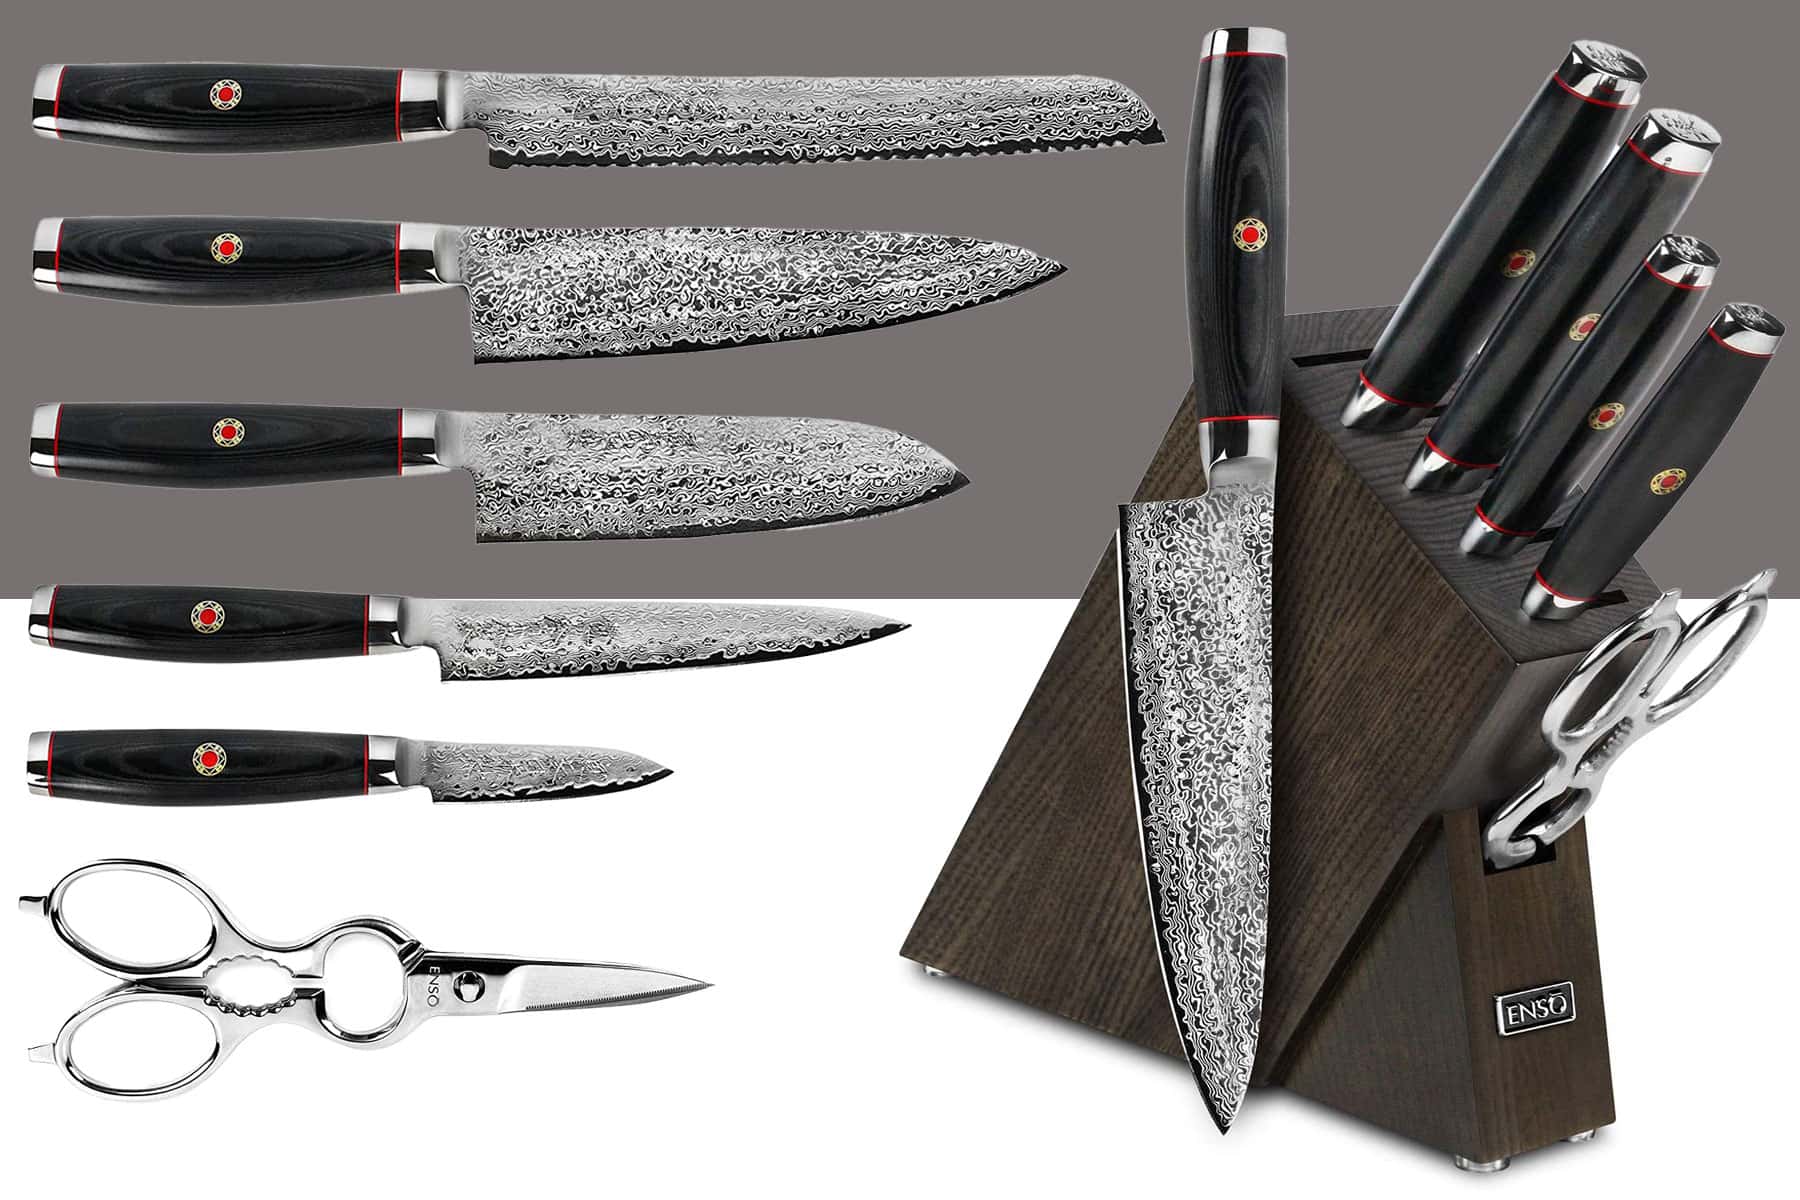 The Enso SG2 high-end knife set shown with the wood storage block and kitchen shears on a white and gray background. 